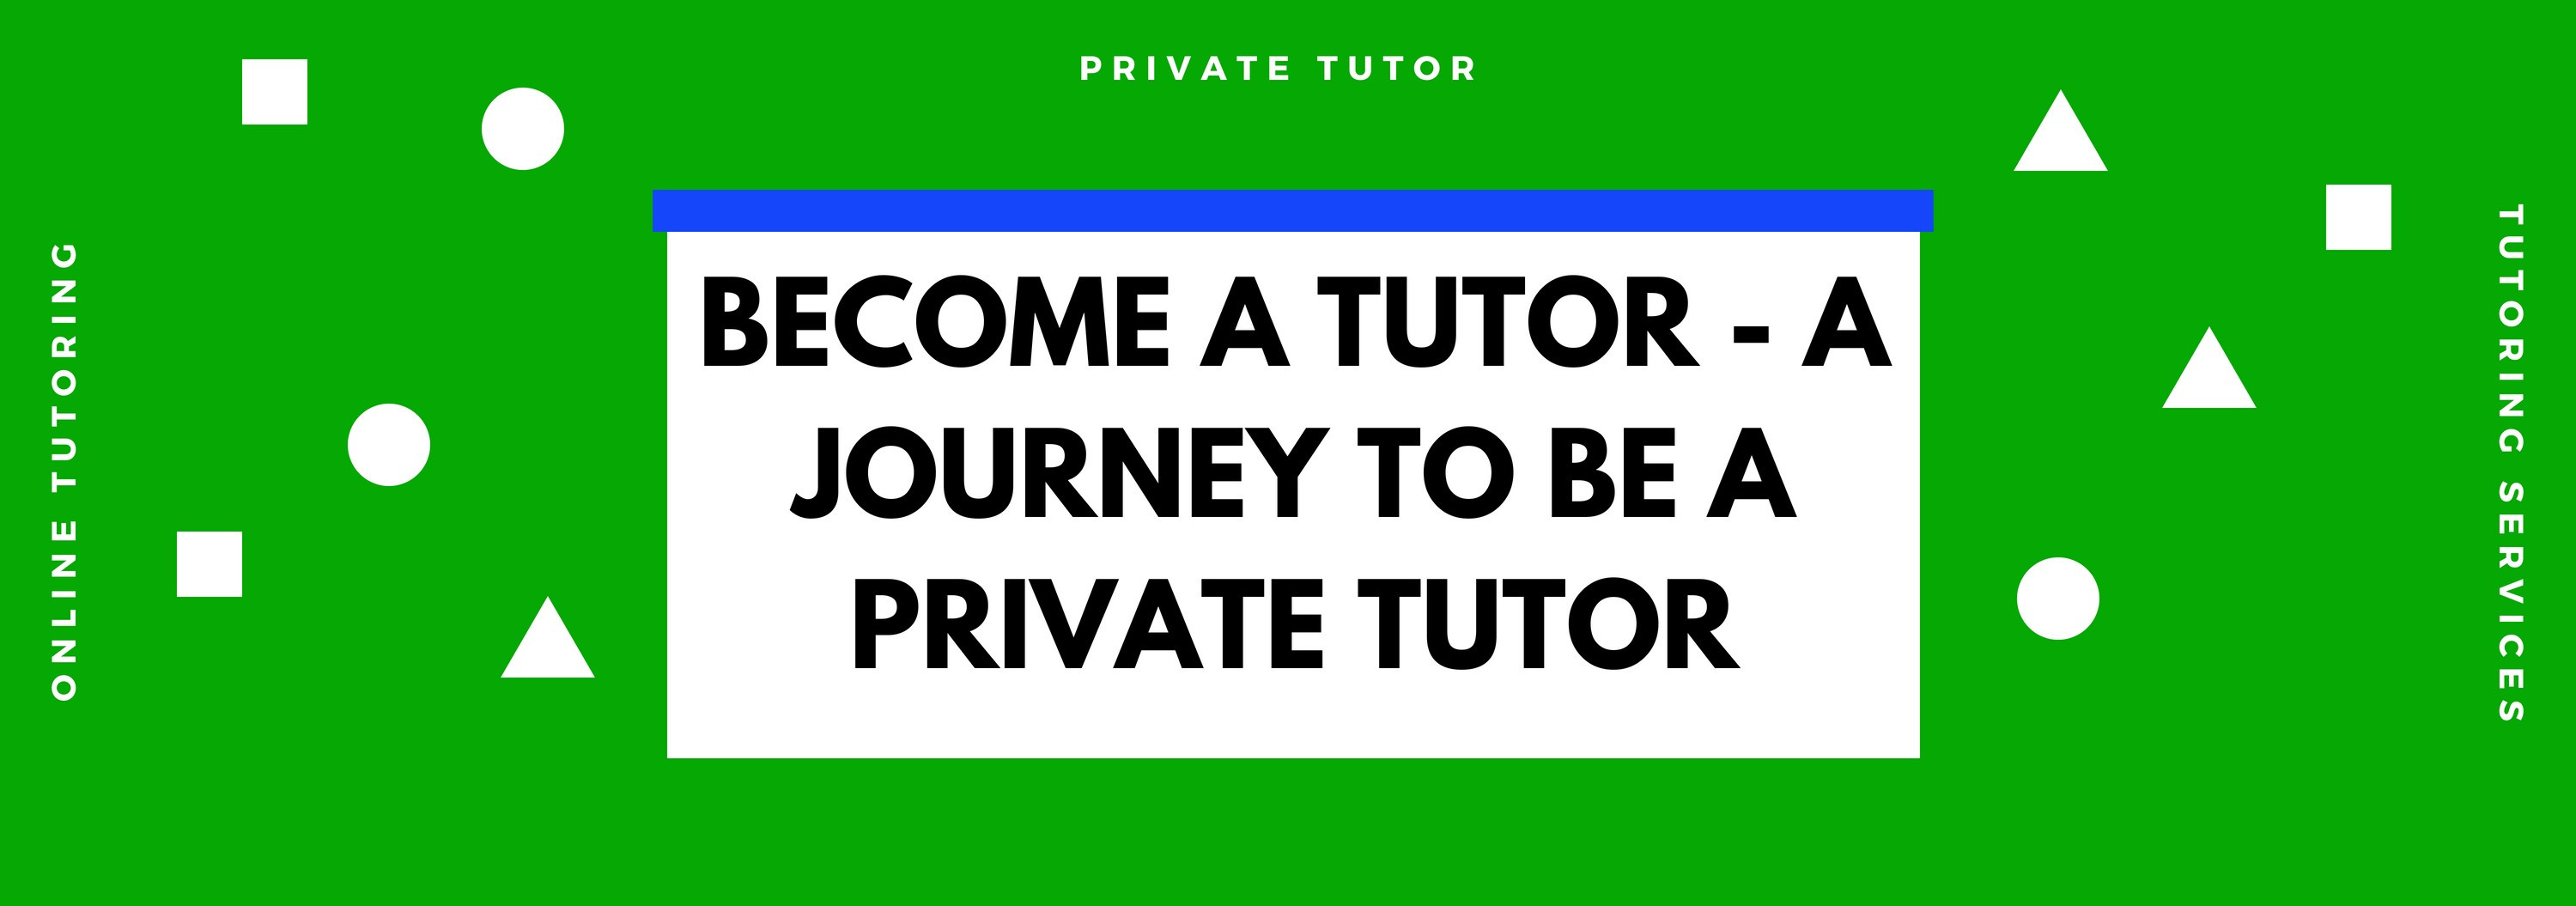 Become a tutor - A Journey to be a Private Tutor